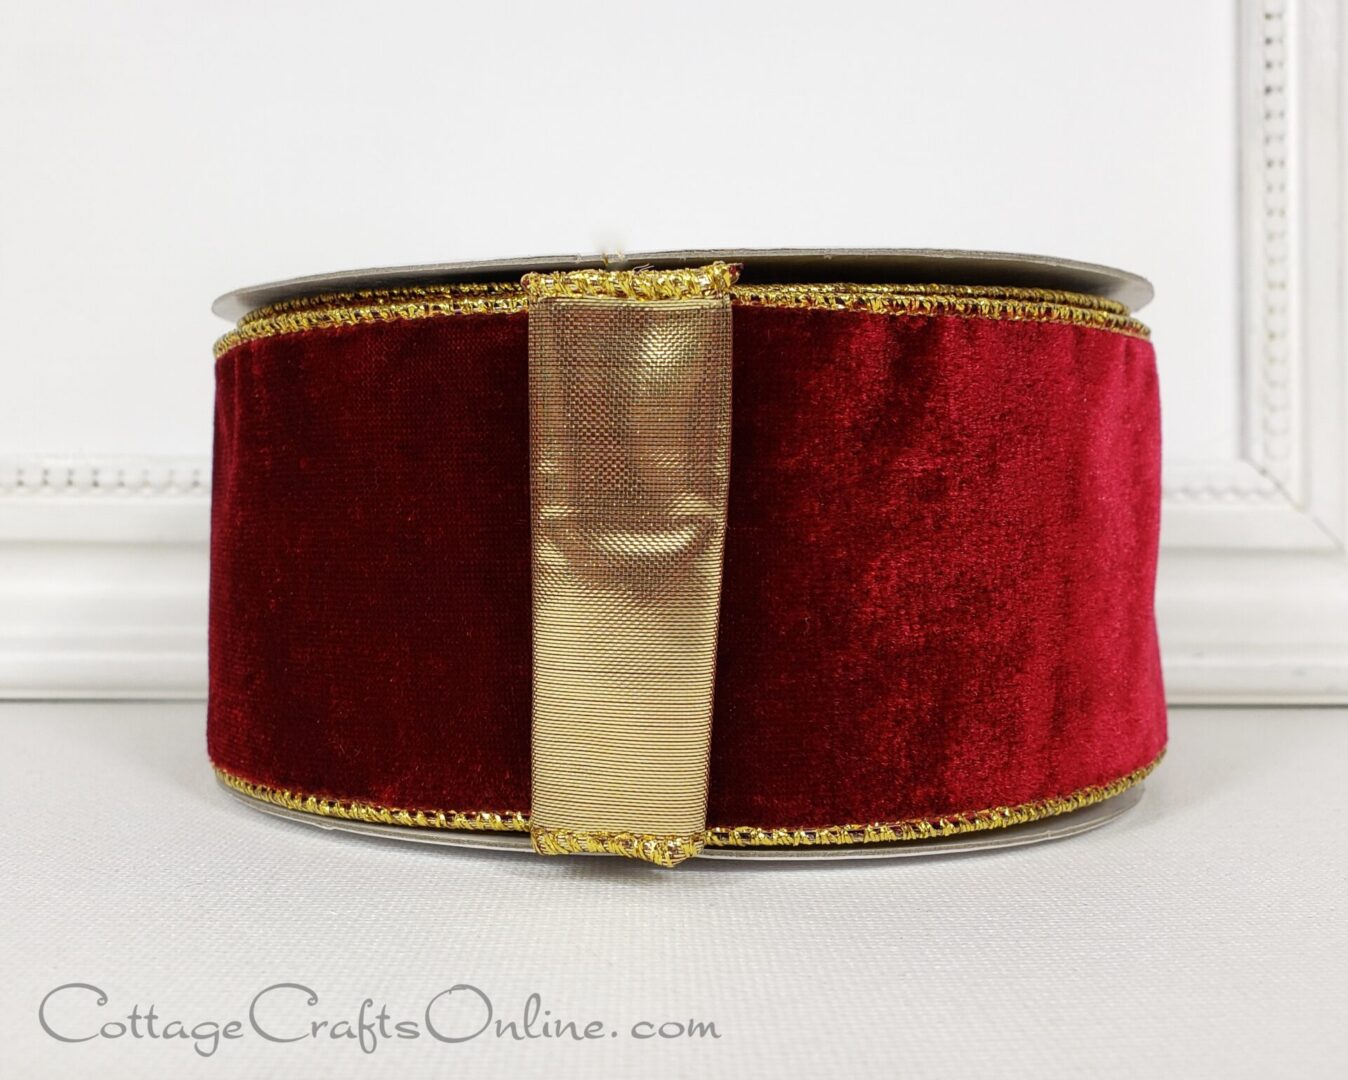 Plush burgundy red velvet with gold lame back 2.5" wide wired ribbon from the Etsy shop of Cottage Crafts Online.